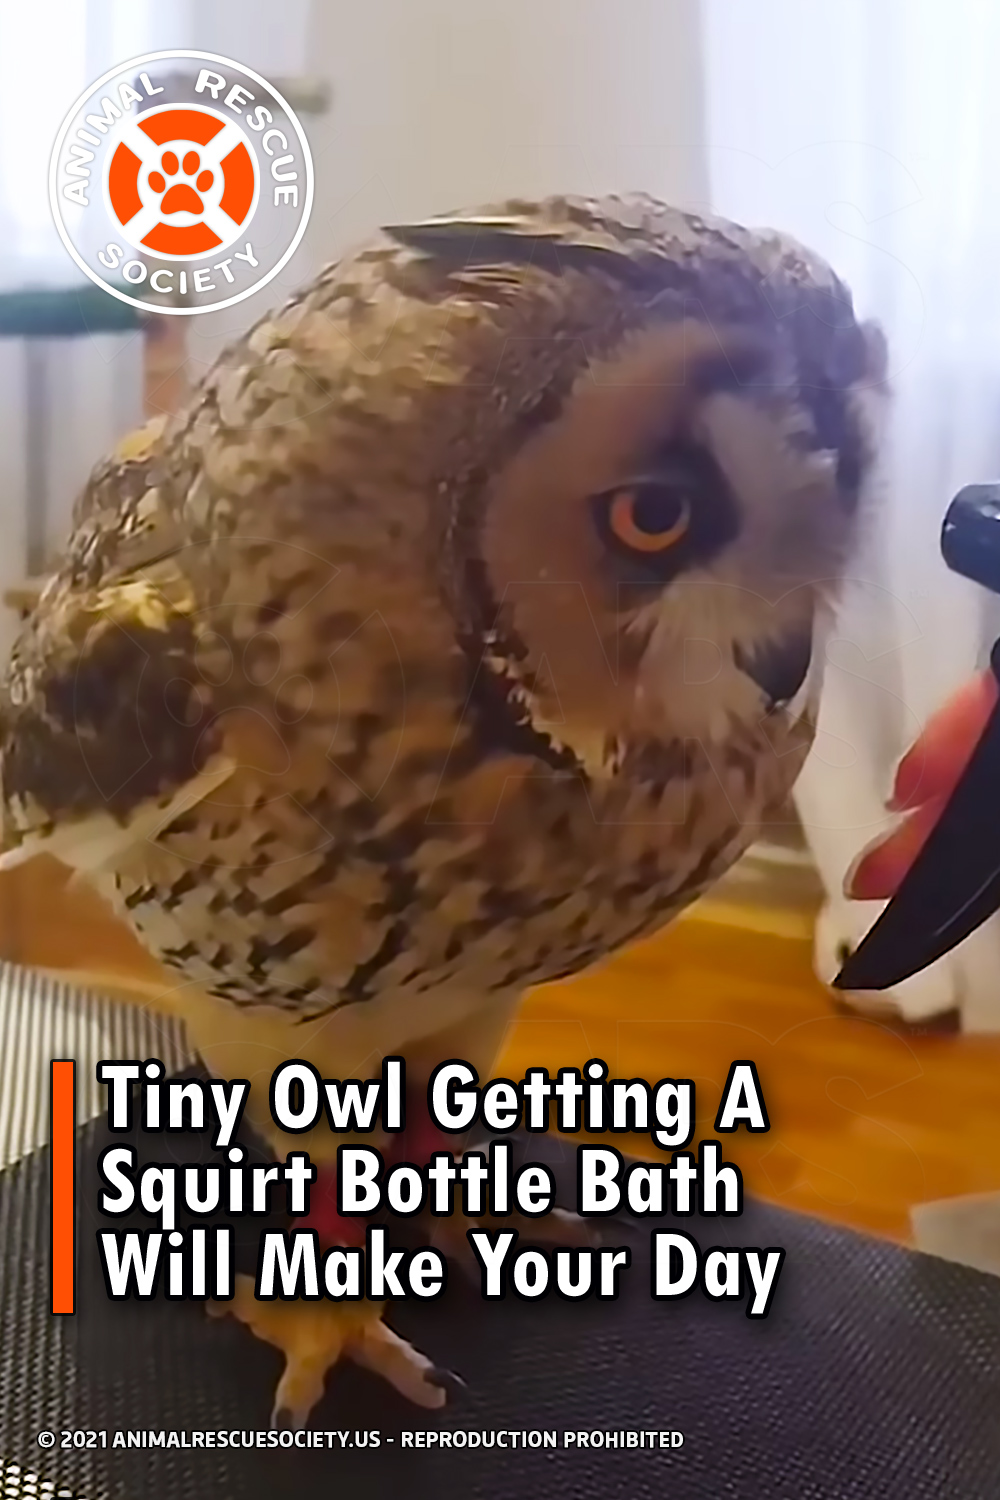 Tiny Owl Getting A Squirt Bottle Bath Will Make Your Day